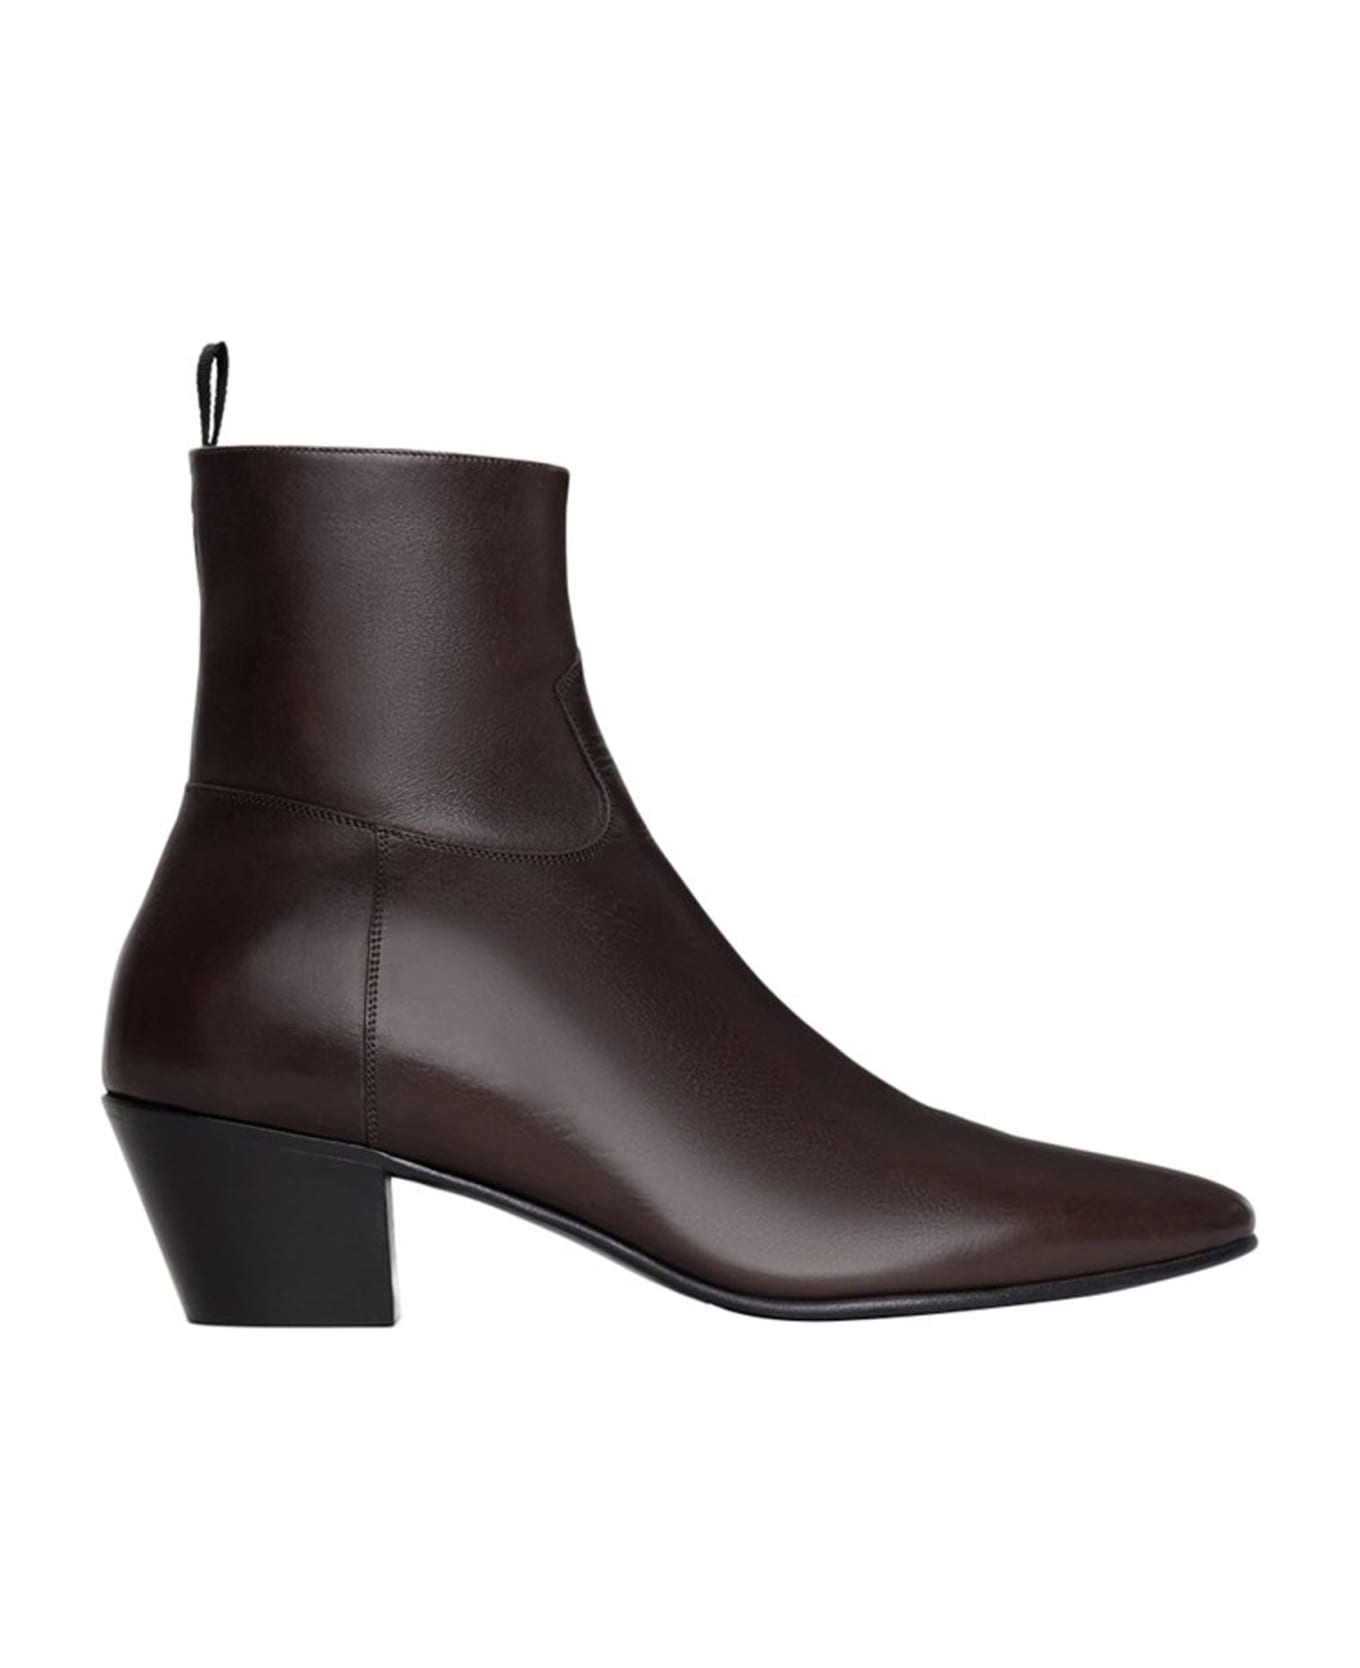 Celine Leather Boots - Brown